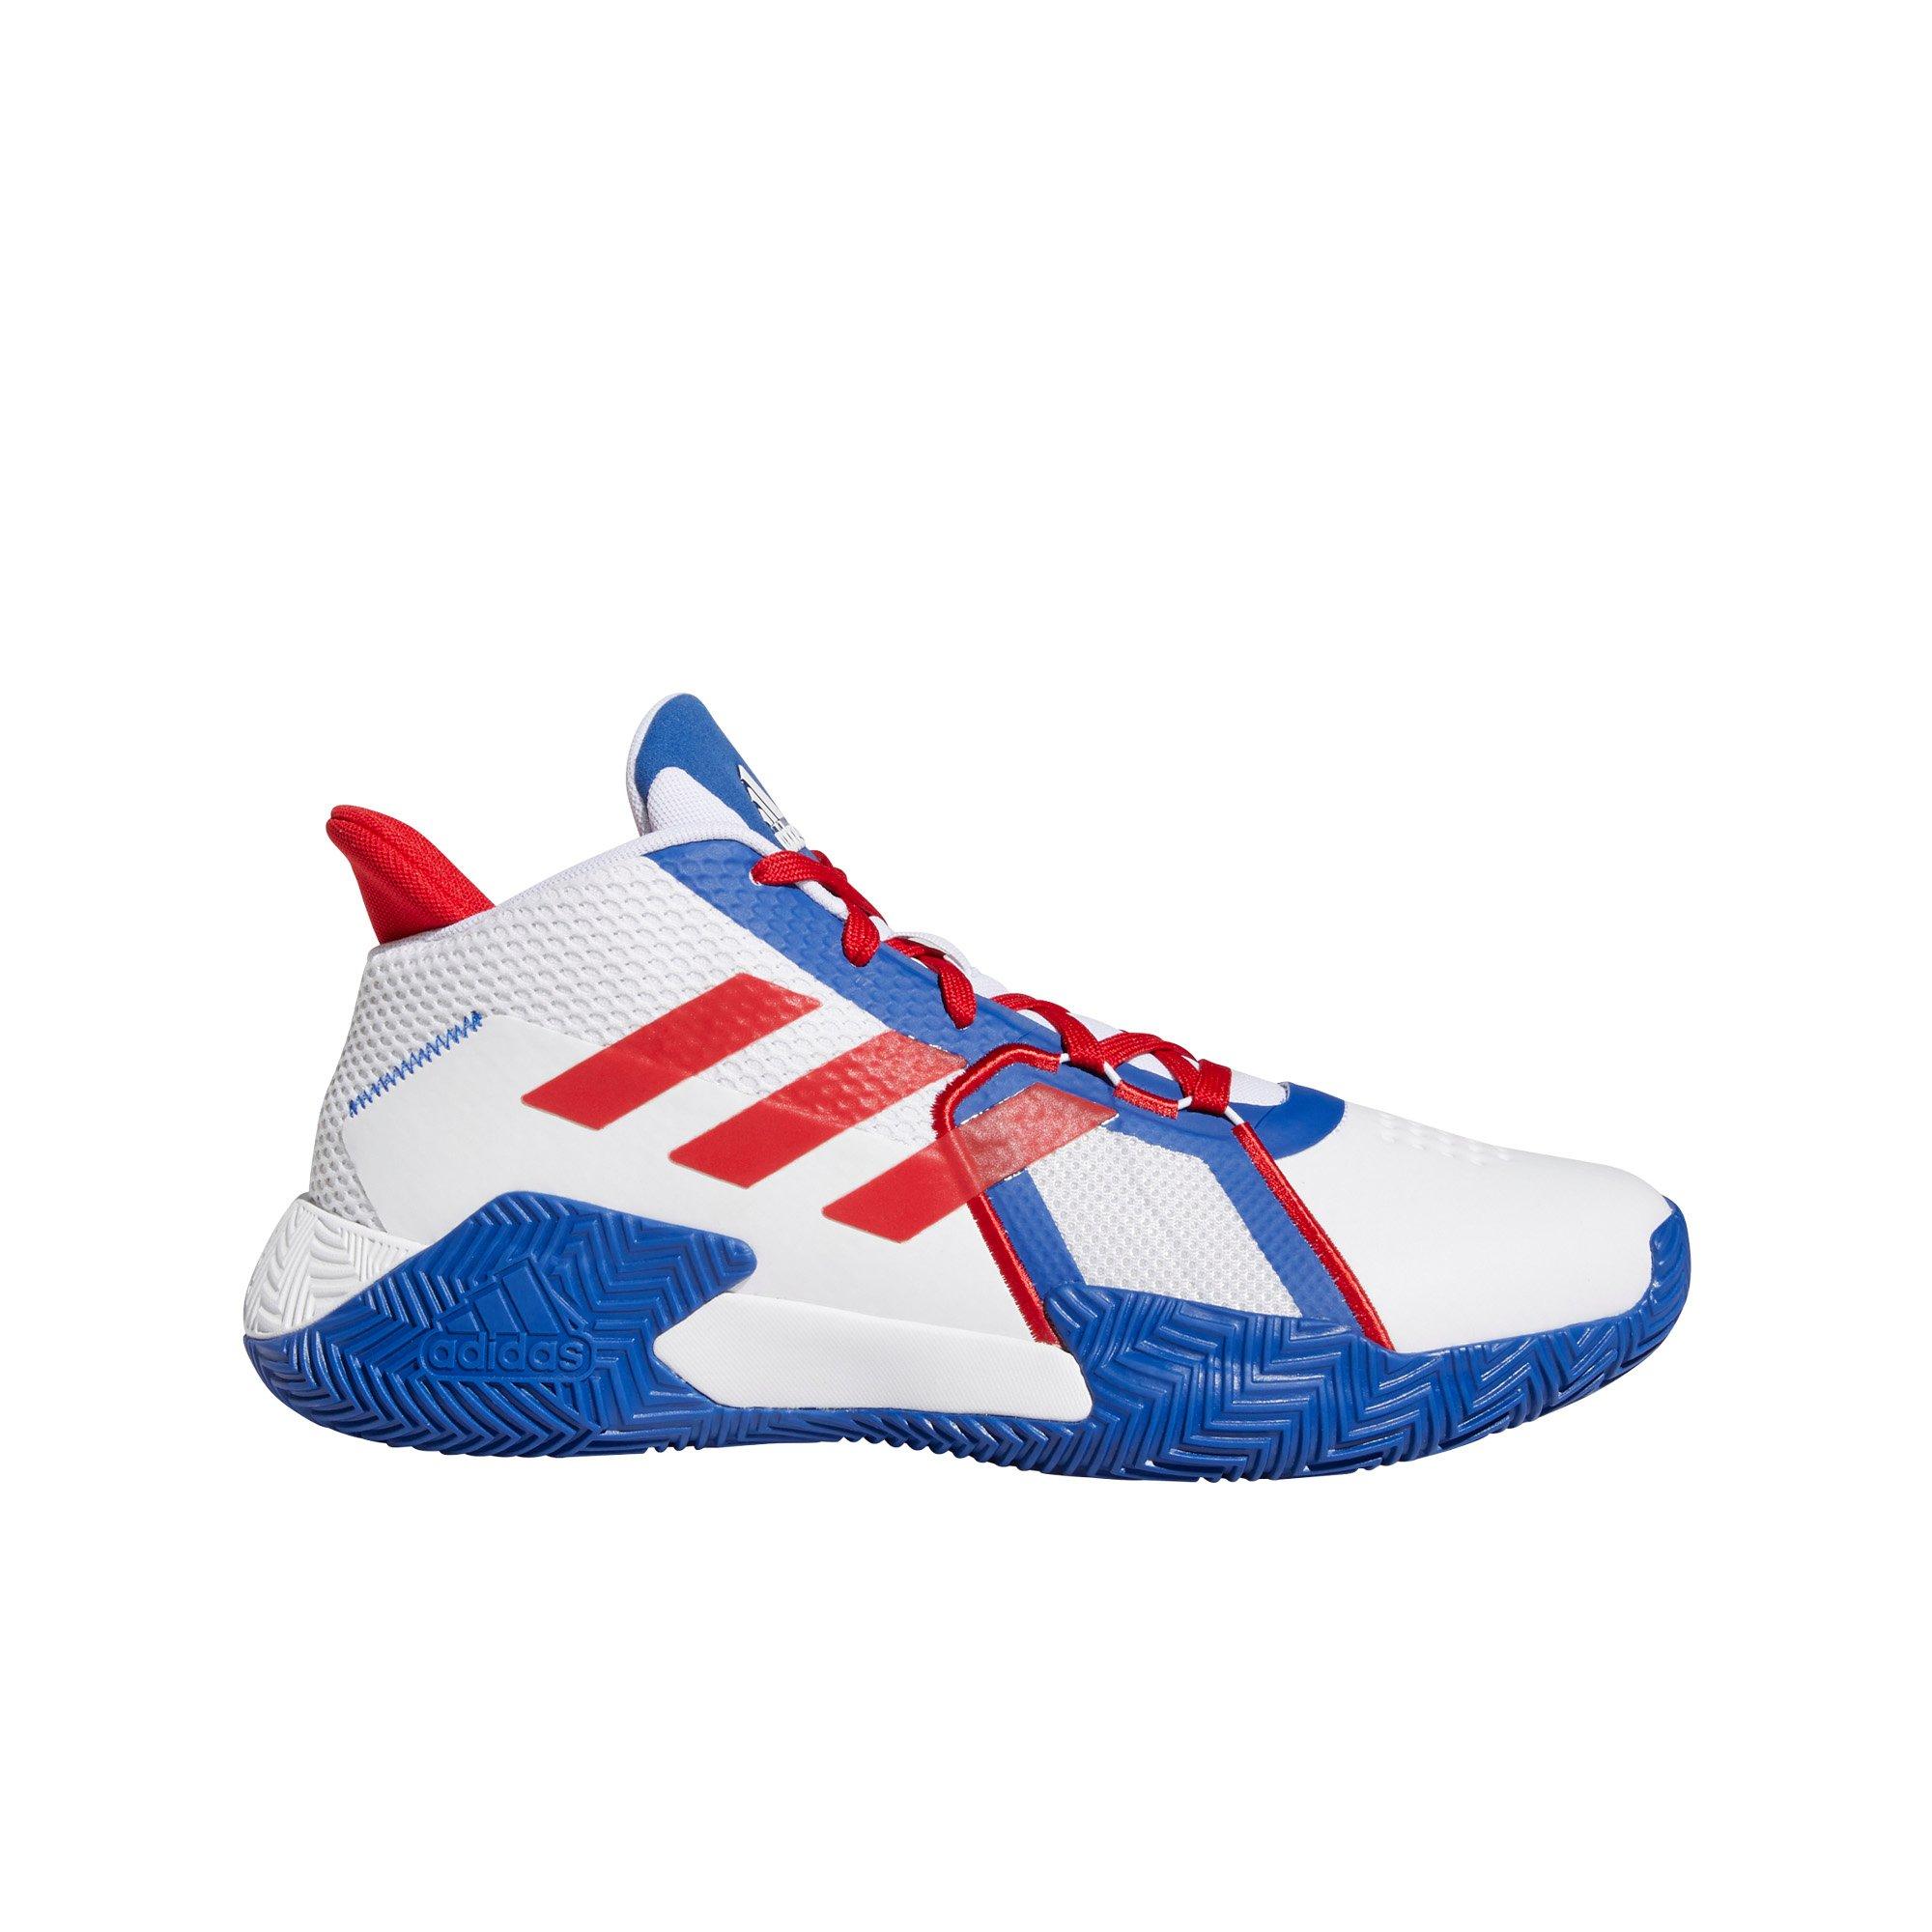 red blue white adidas shoes